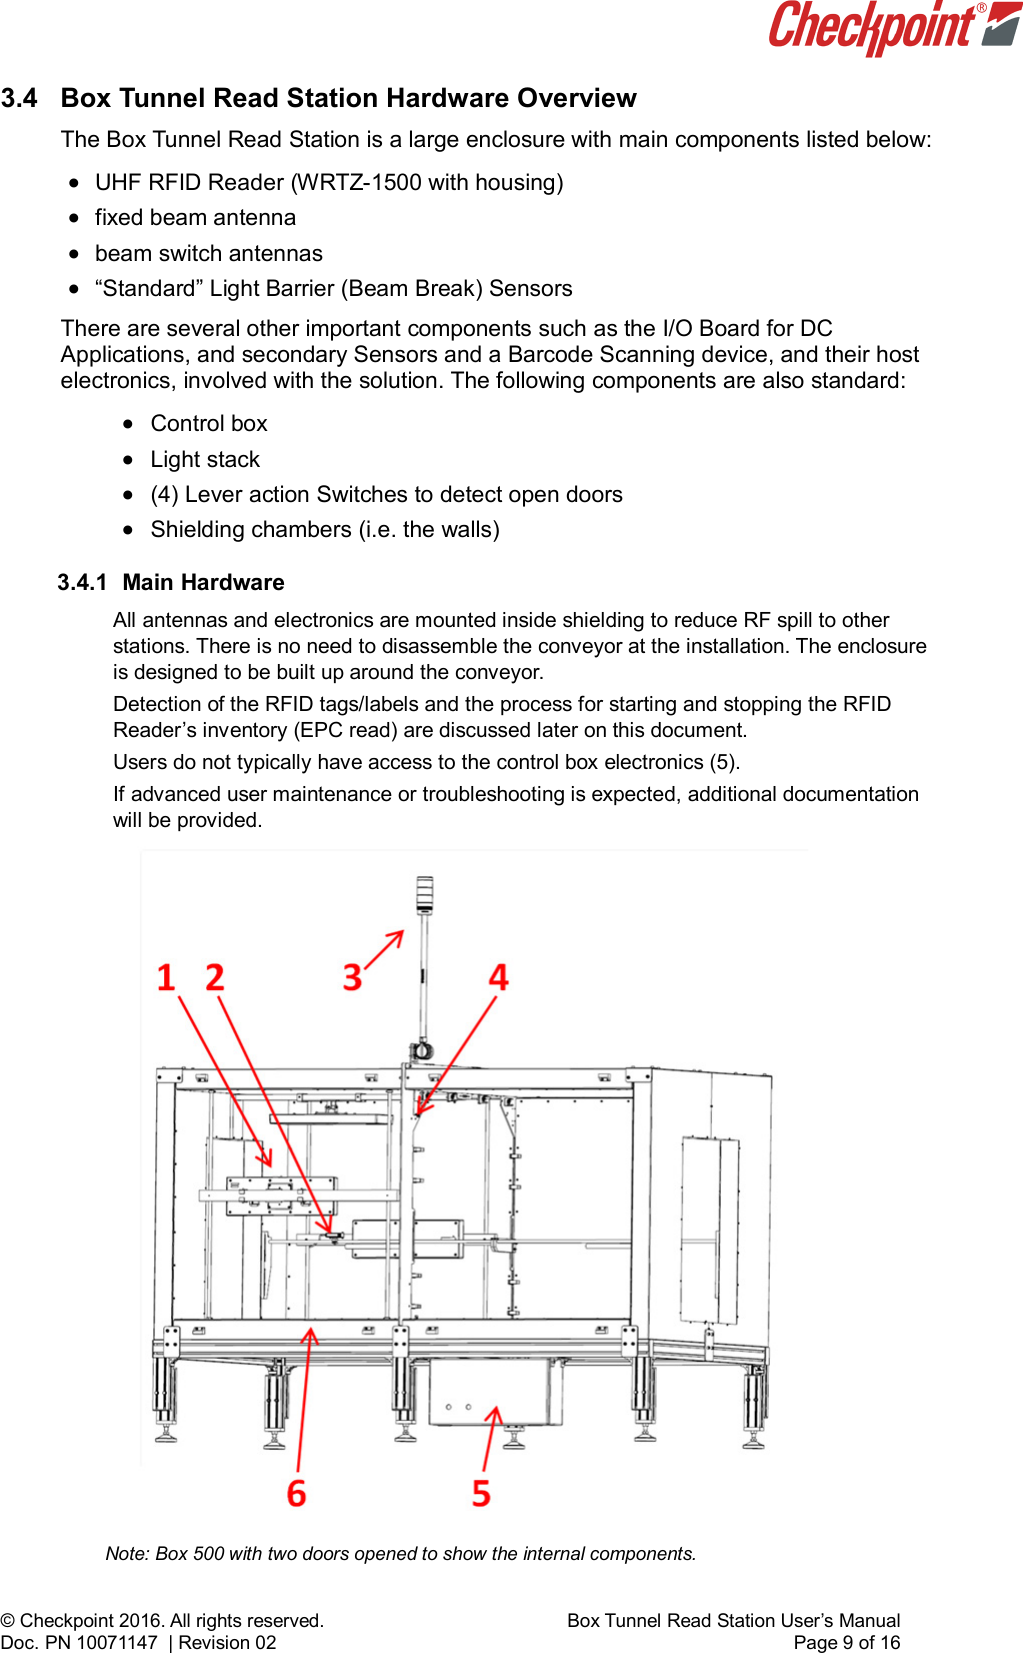    © Checkpoint 2016. All rights reserved.     Box Tunnel Read Station User’s Manual Doc. PN 10071147  | Revision 02    Page 9 of 16 3.4  Box Tunnel Read Station Hardware Overview The Box Tunnel Read Station is a large enclosure with main components listed below: • UHF RFID Reader (WRTZ-1500 with housing) • fixed beam antenna • beam switch antennas  • “Standard” Light Barrier (Beam Break) Sensors  There are several other important components such as the I/O Board for DC Applications, and secondary Sensors and a Barcode Scanning device, and their host electronics, involved with the solution. The following components are also standard:  • Control box • Light stack • (4) Lever action Switches to detect open doors • Shielding chambers (i.e. the walls) 3.4.1 Main Hardware All antennas and electronics are mounted inside shielding to reduce RF spill to other stations. There is no need to disassemble the conveyor at the installation. The enclosure is designed to be built up around the conveyor. Detection of the RFID tags/labels and the process for starting and stopping the RFID Reader’s inventory (EPC read) are discussed later on this document. Users do not typically have access to the control box electronics (5). If advanced user maintenance or troubleshooting is expected, additional documentation will be provided.                      Note: Box 500 with two doors opened to show the internal components.   